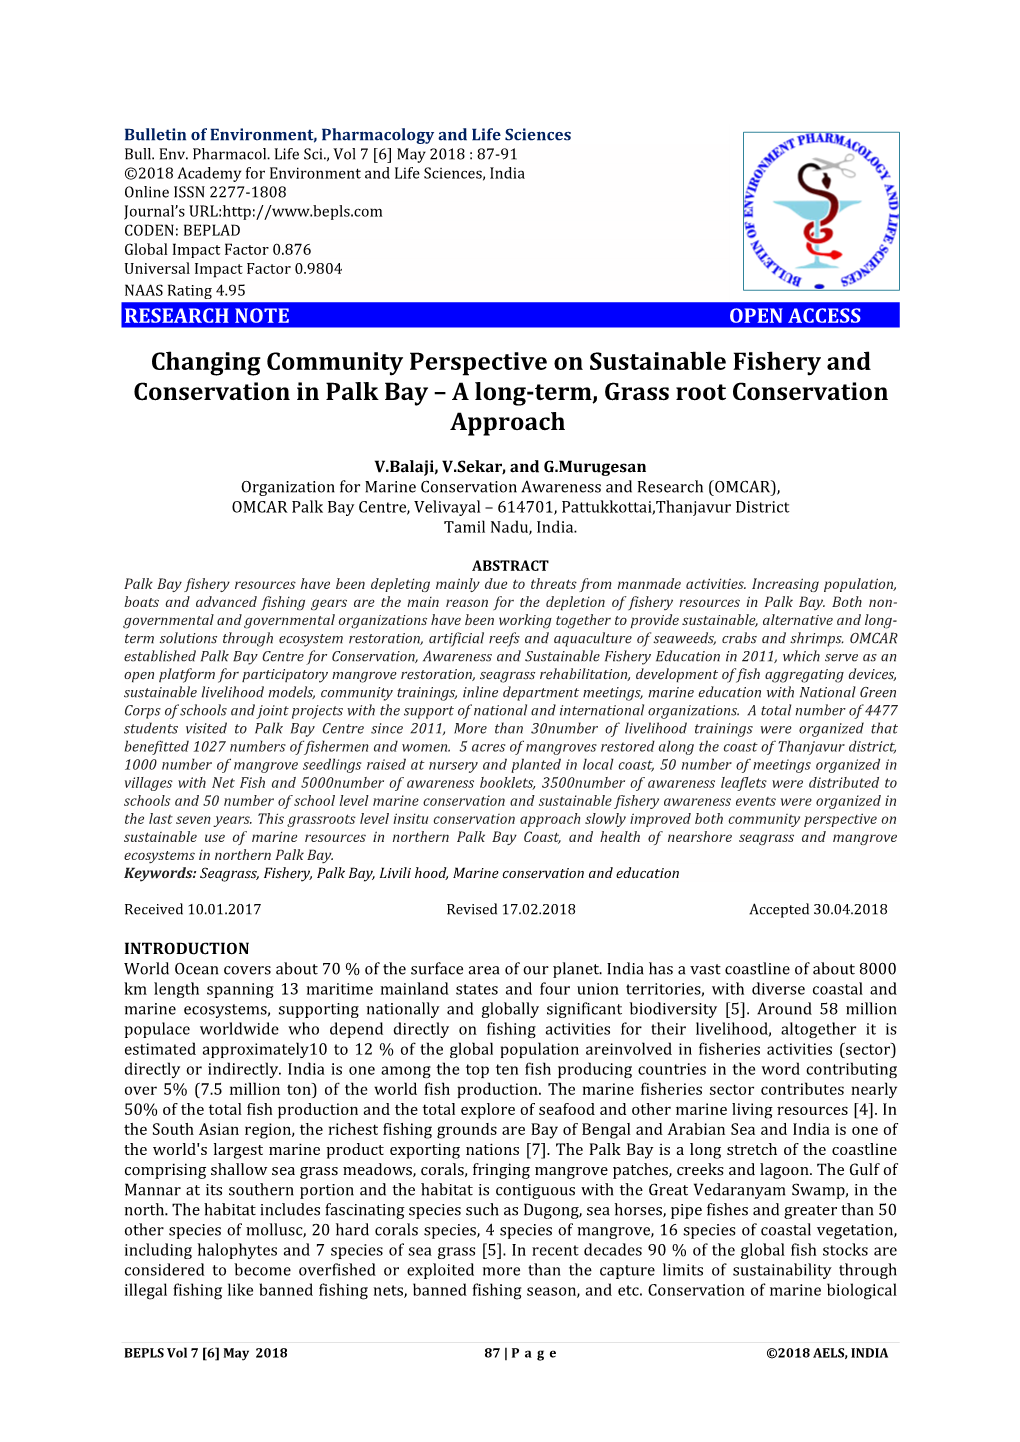 Changing Community Perspective on Sustainable Fishery and Conservation in Palk Bay – a Long-Term, Grass Root Conservation Approach